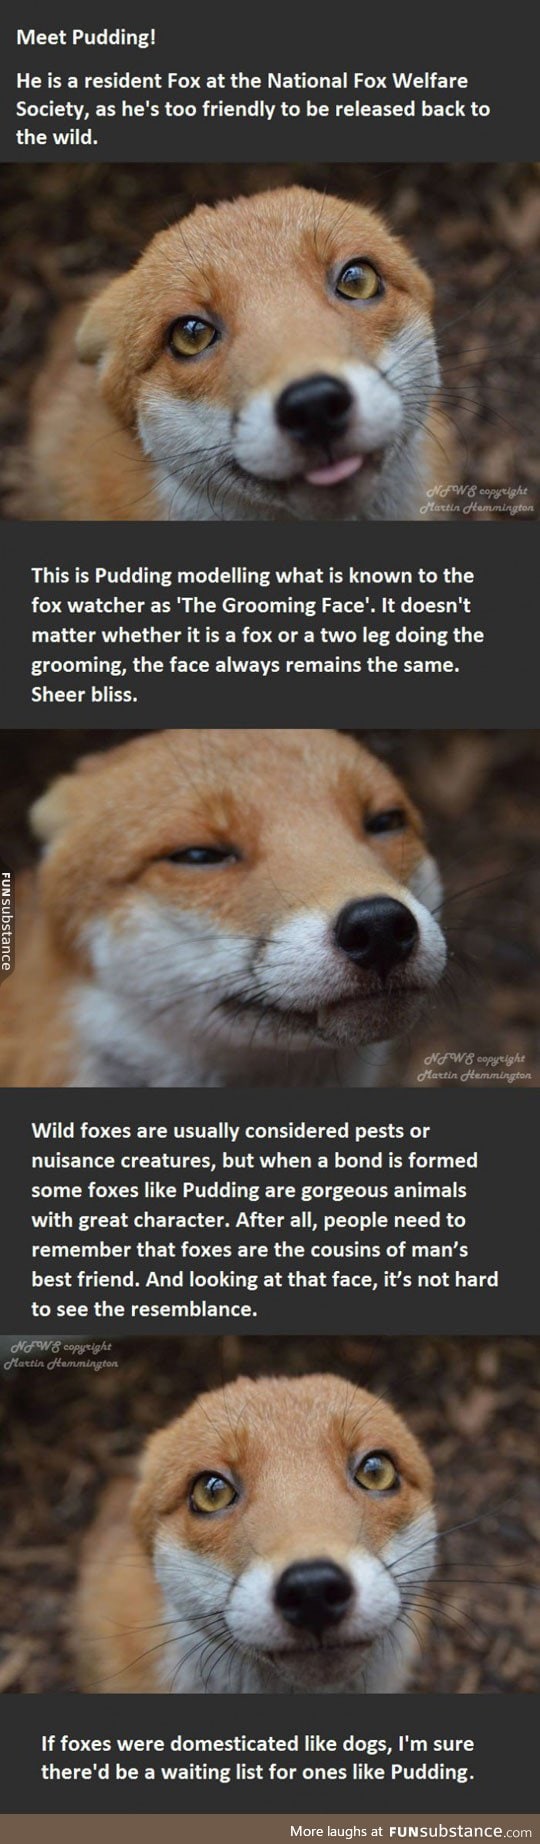 Foxes are just misunderstood creatures